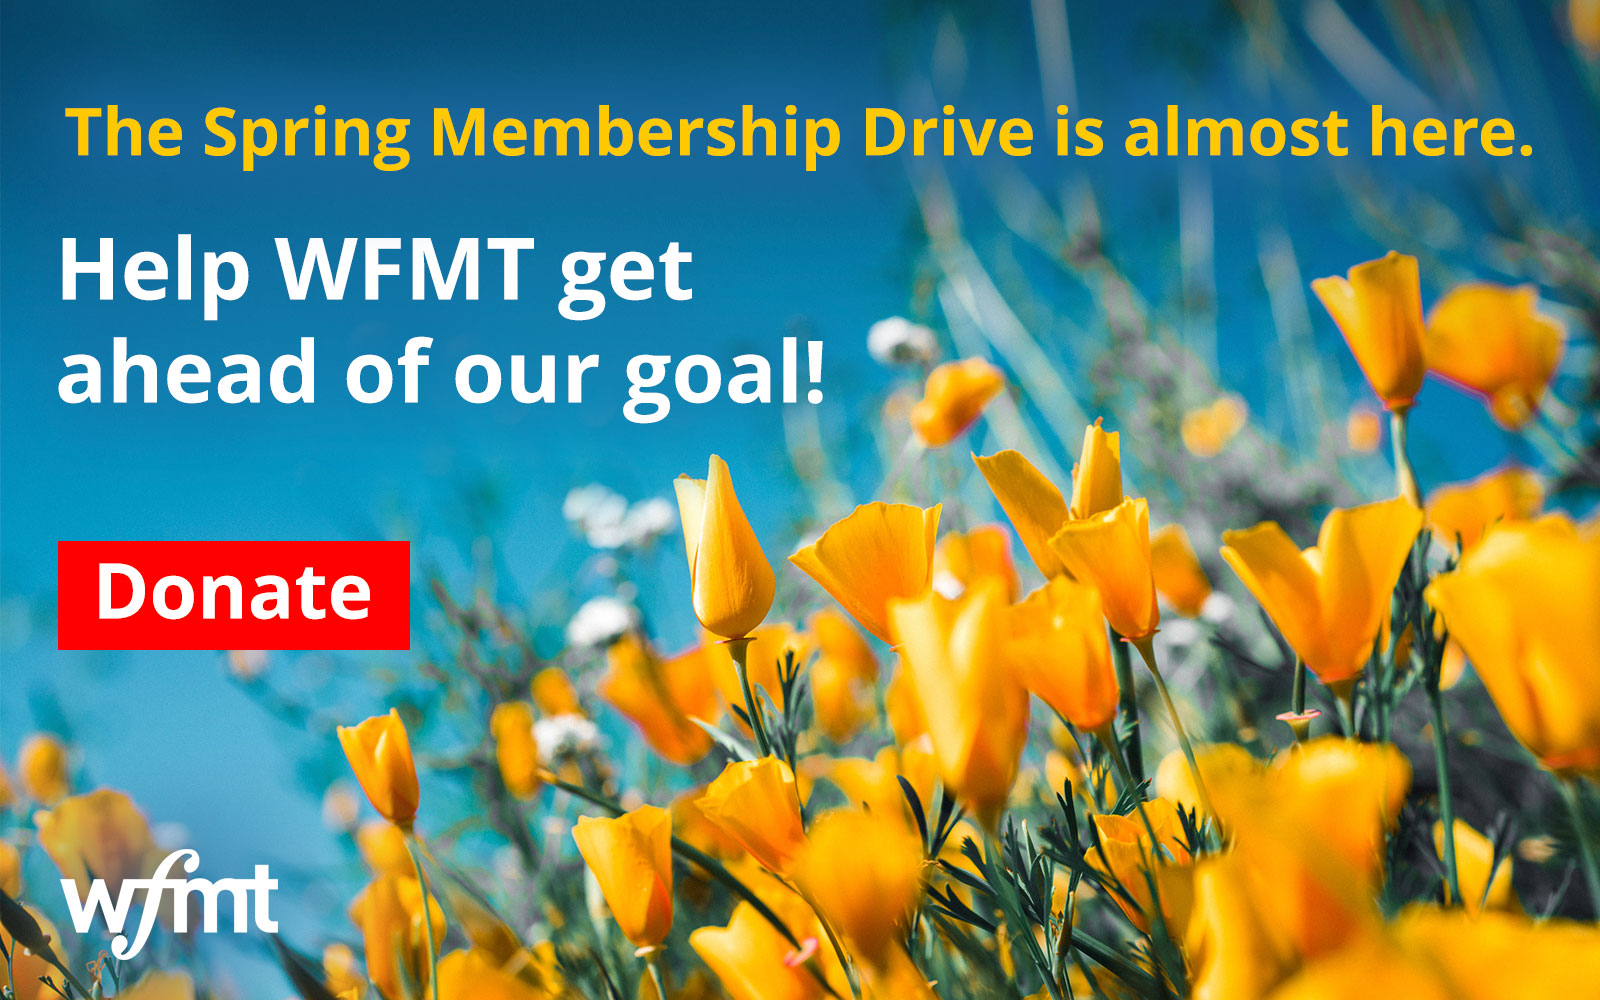 Help WFMT get ahead of our goal!